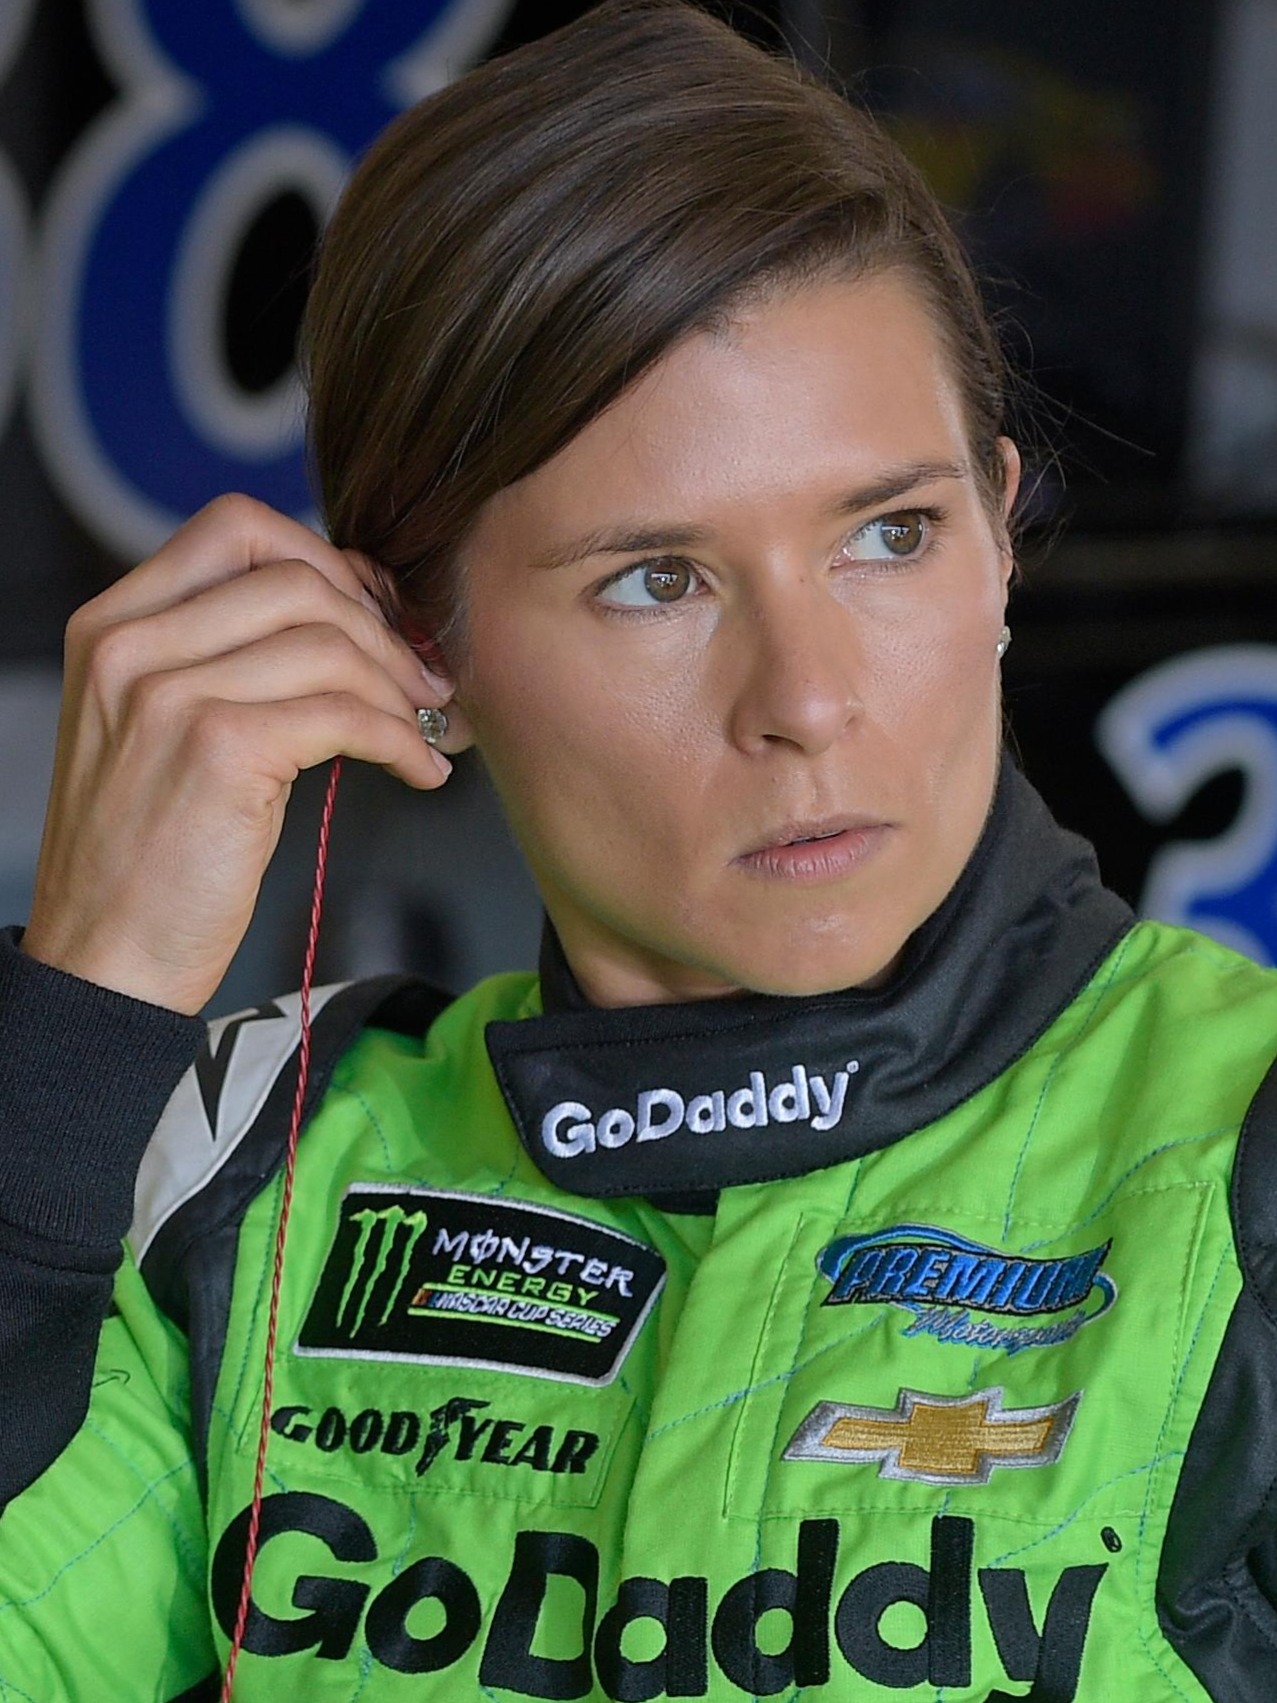 Which race did Danica Patrick win to become the first woman to win a major closed-course motorsport event?